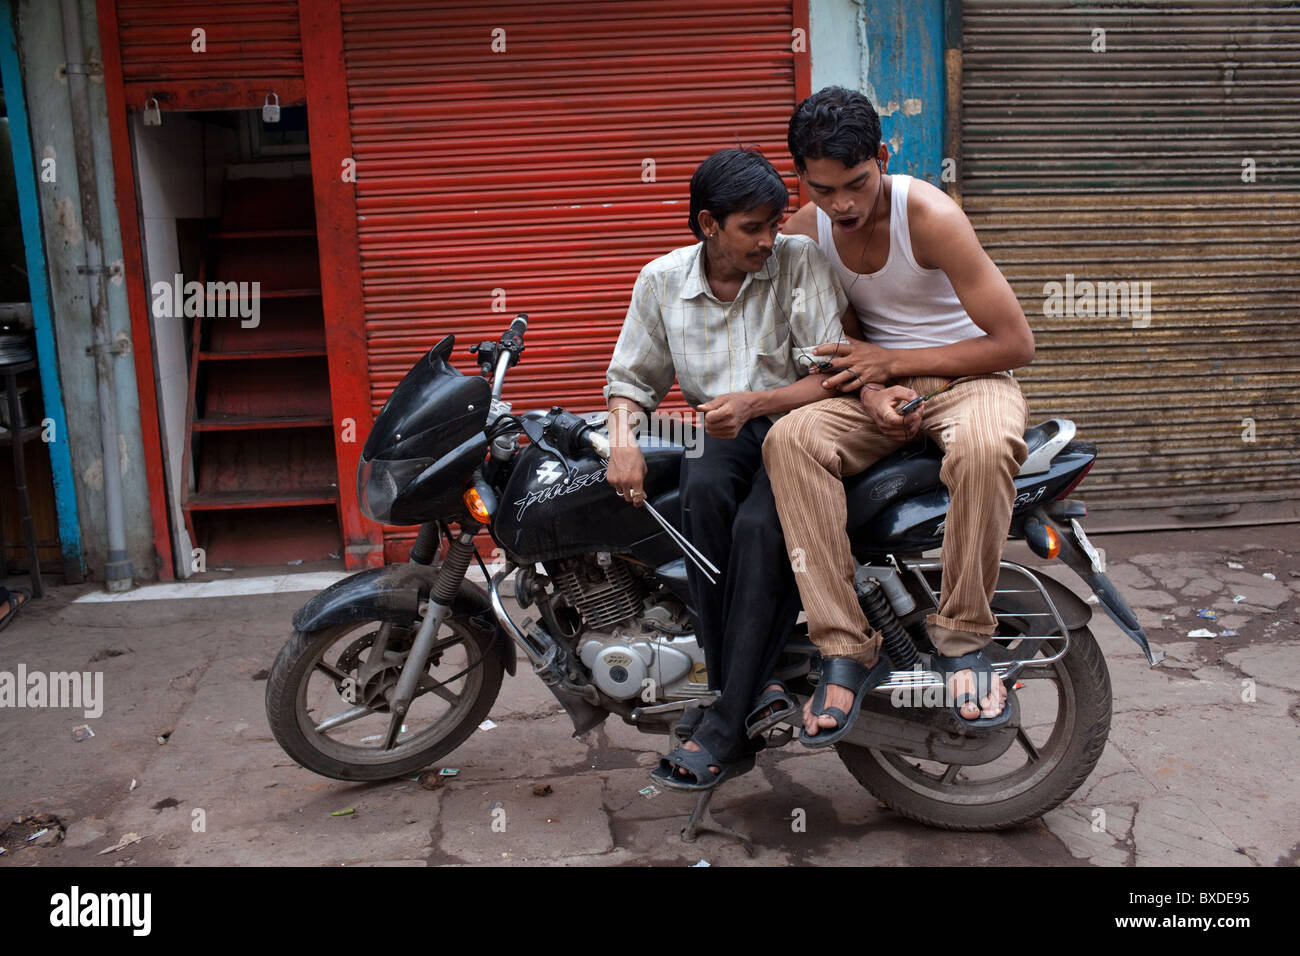 Two young men on a bike listen to music from a mobile phone in Old Delhi, capital of India. Stock Photo